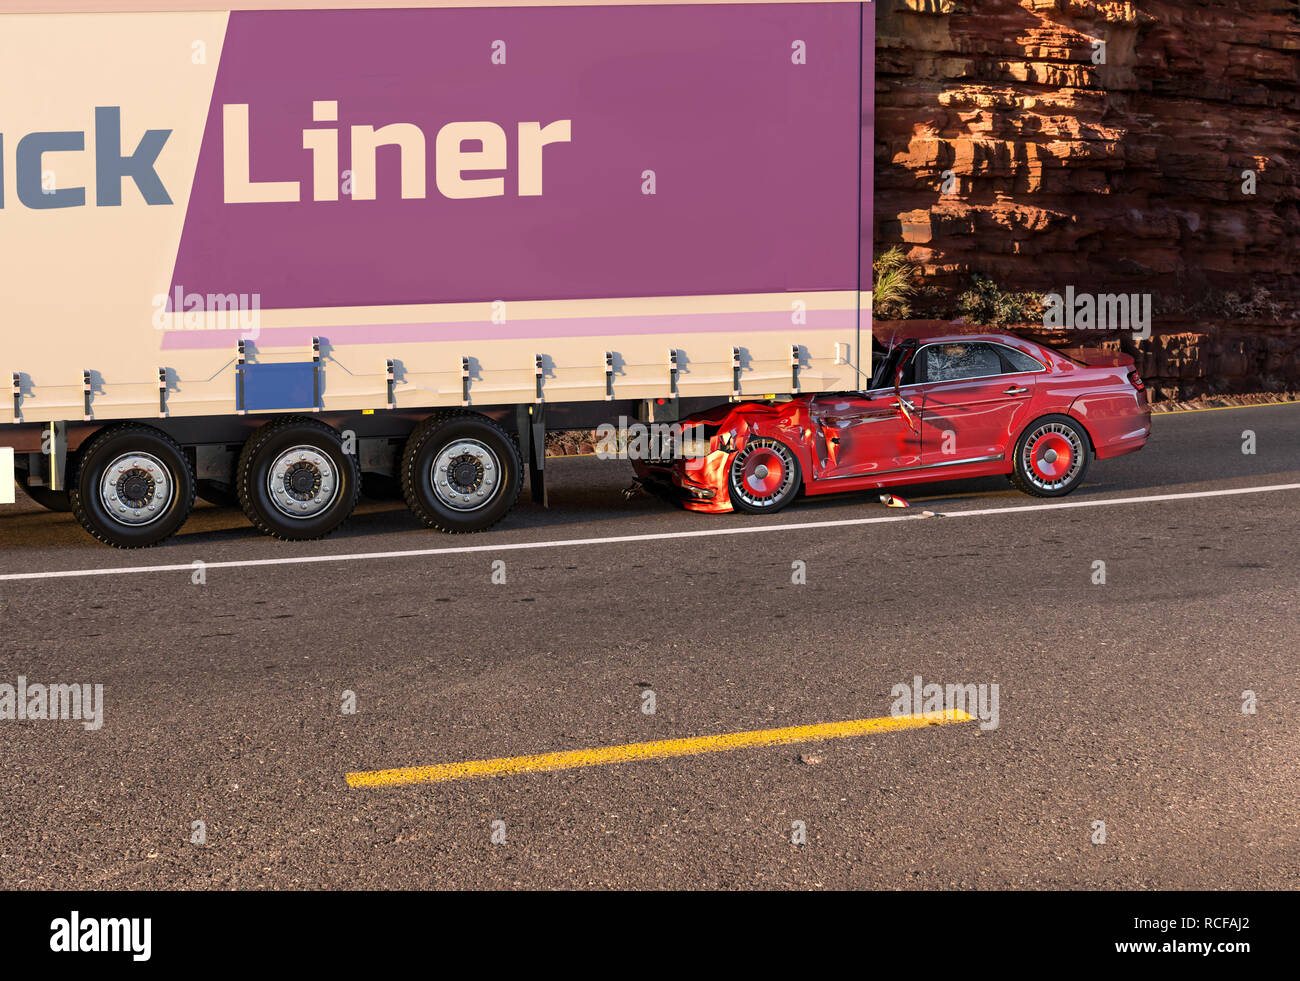 Two cars accident. Crashed cars. A red coupé/sedan against the back of a big truck. Big damage. On the road with environment background. Stock Photo